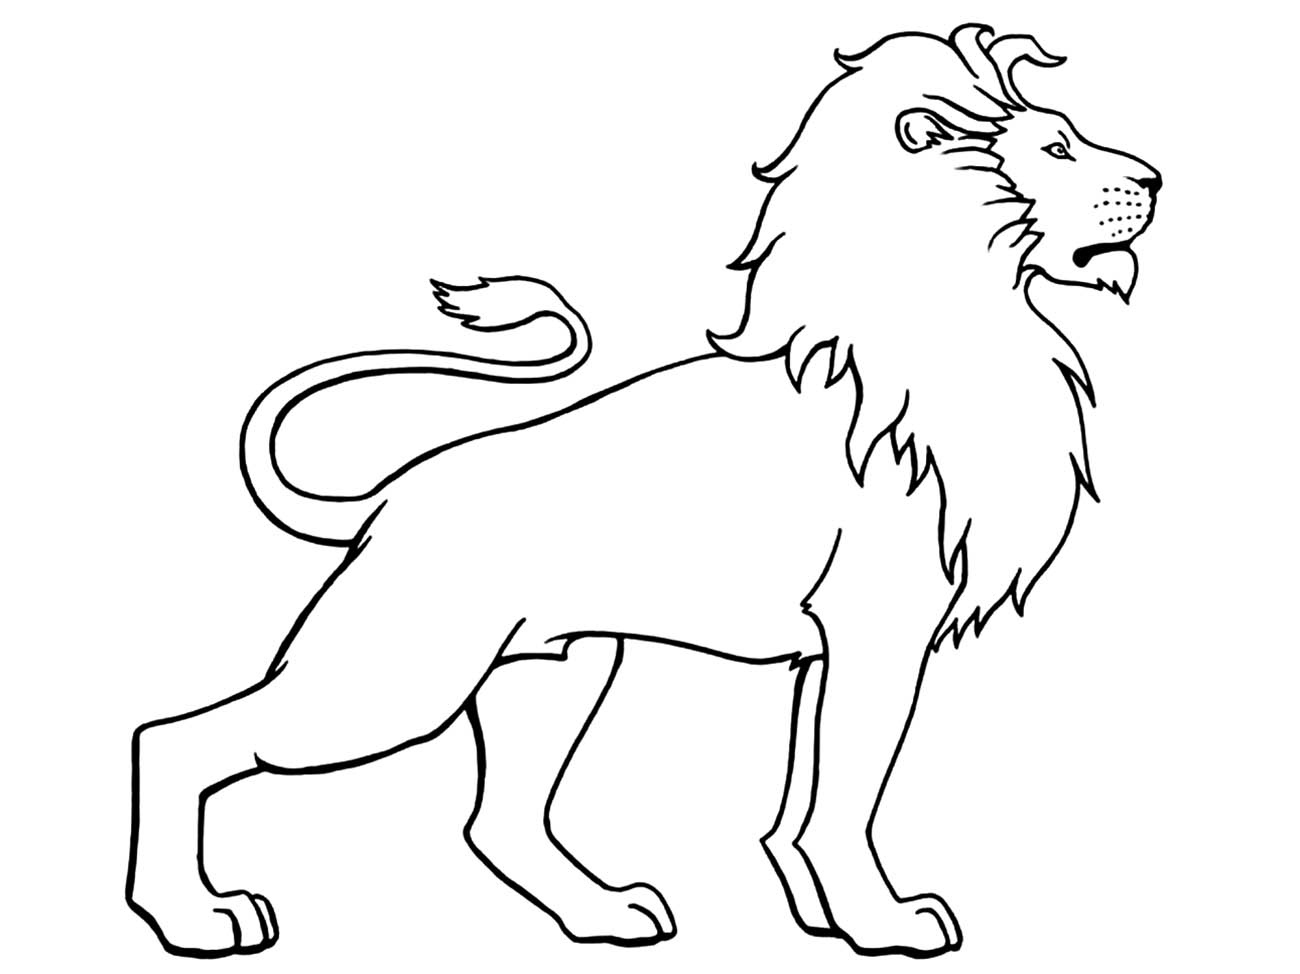 Download Lion to print for free - Lion Kids Coloring Pages